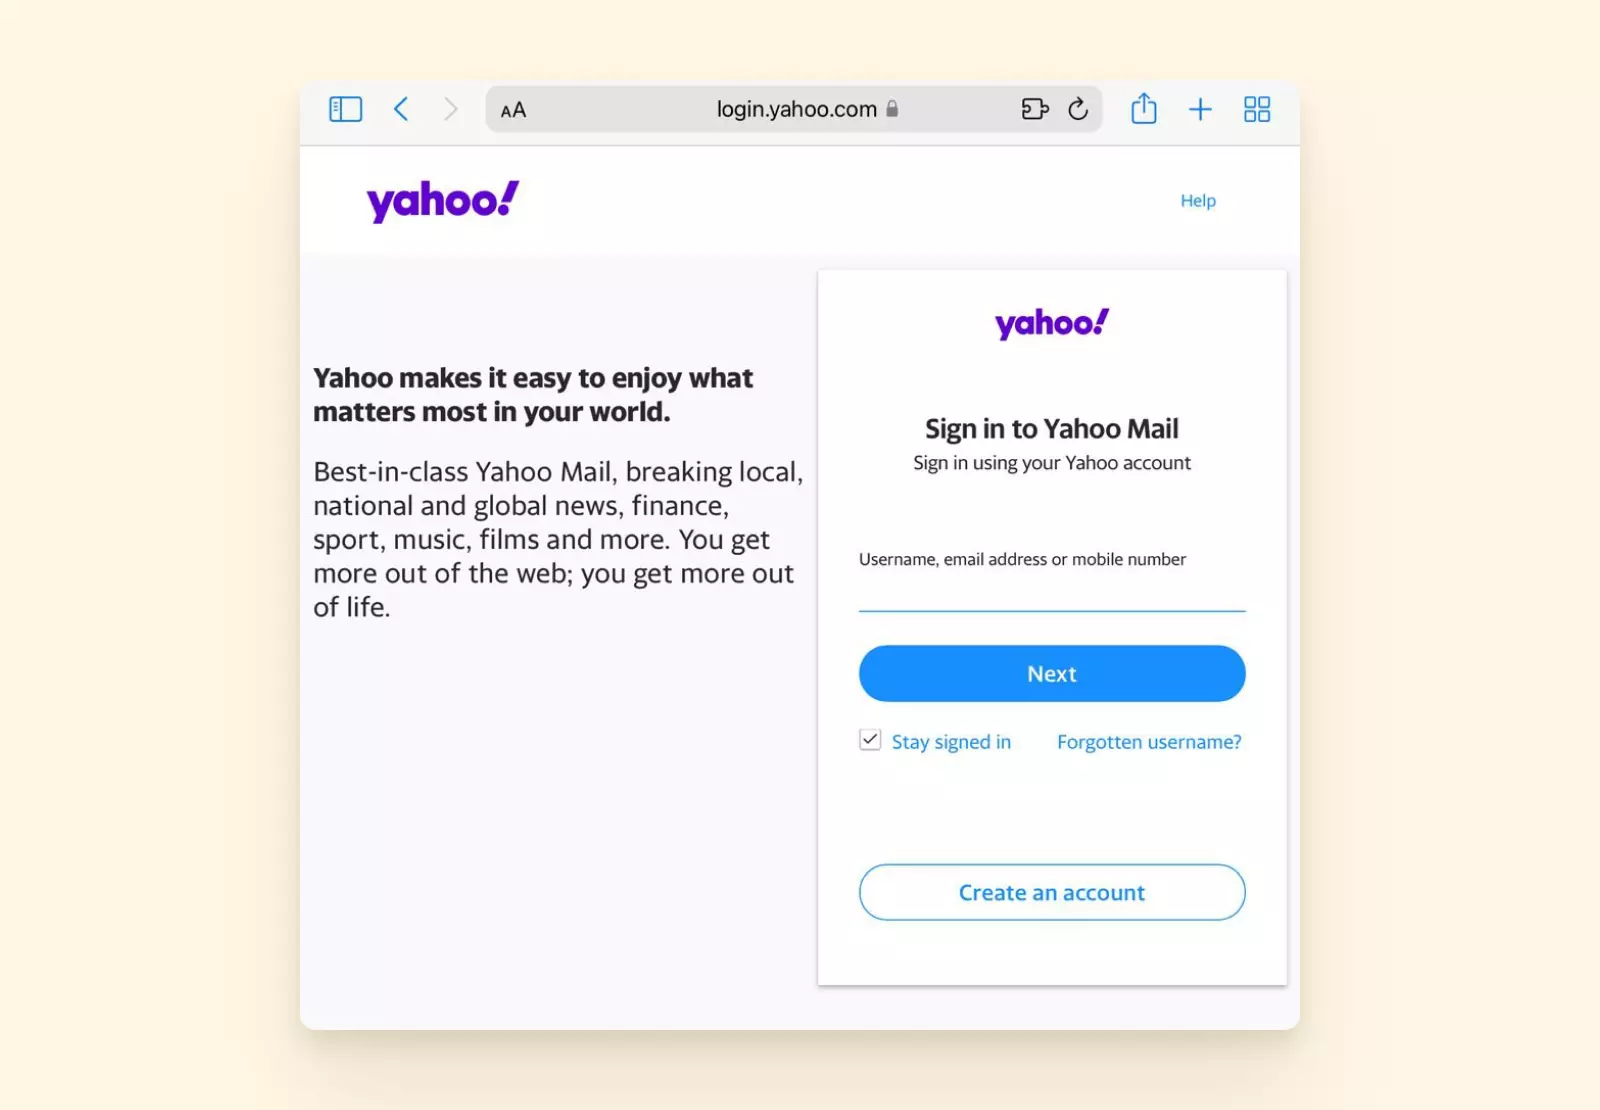 Yahoo sign-in interface